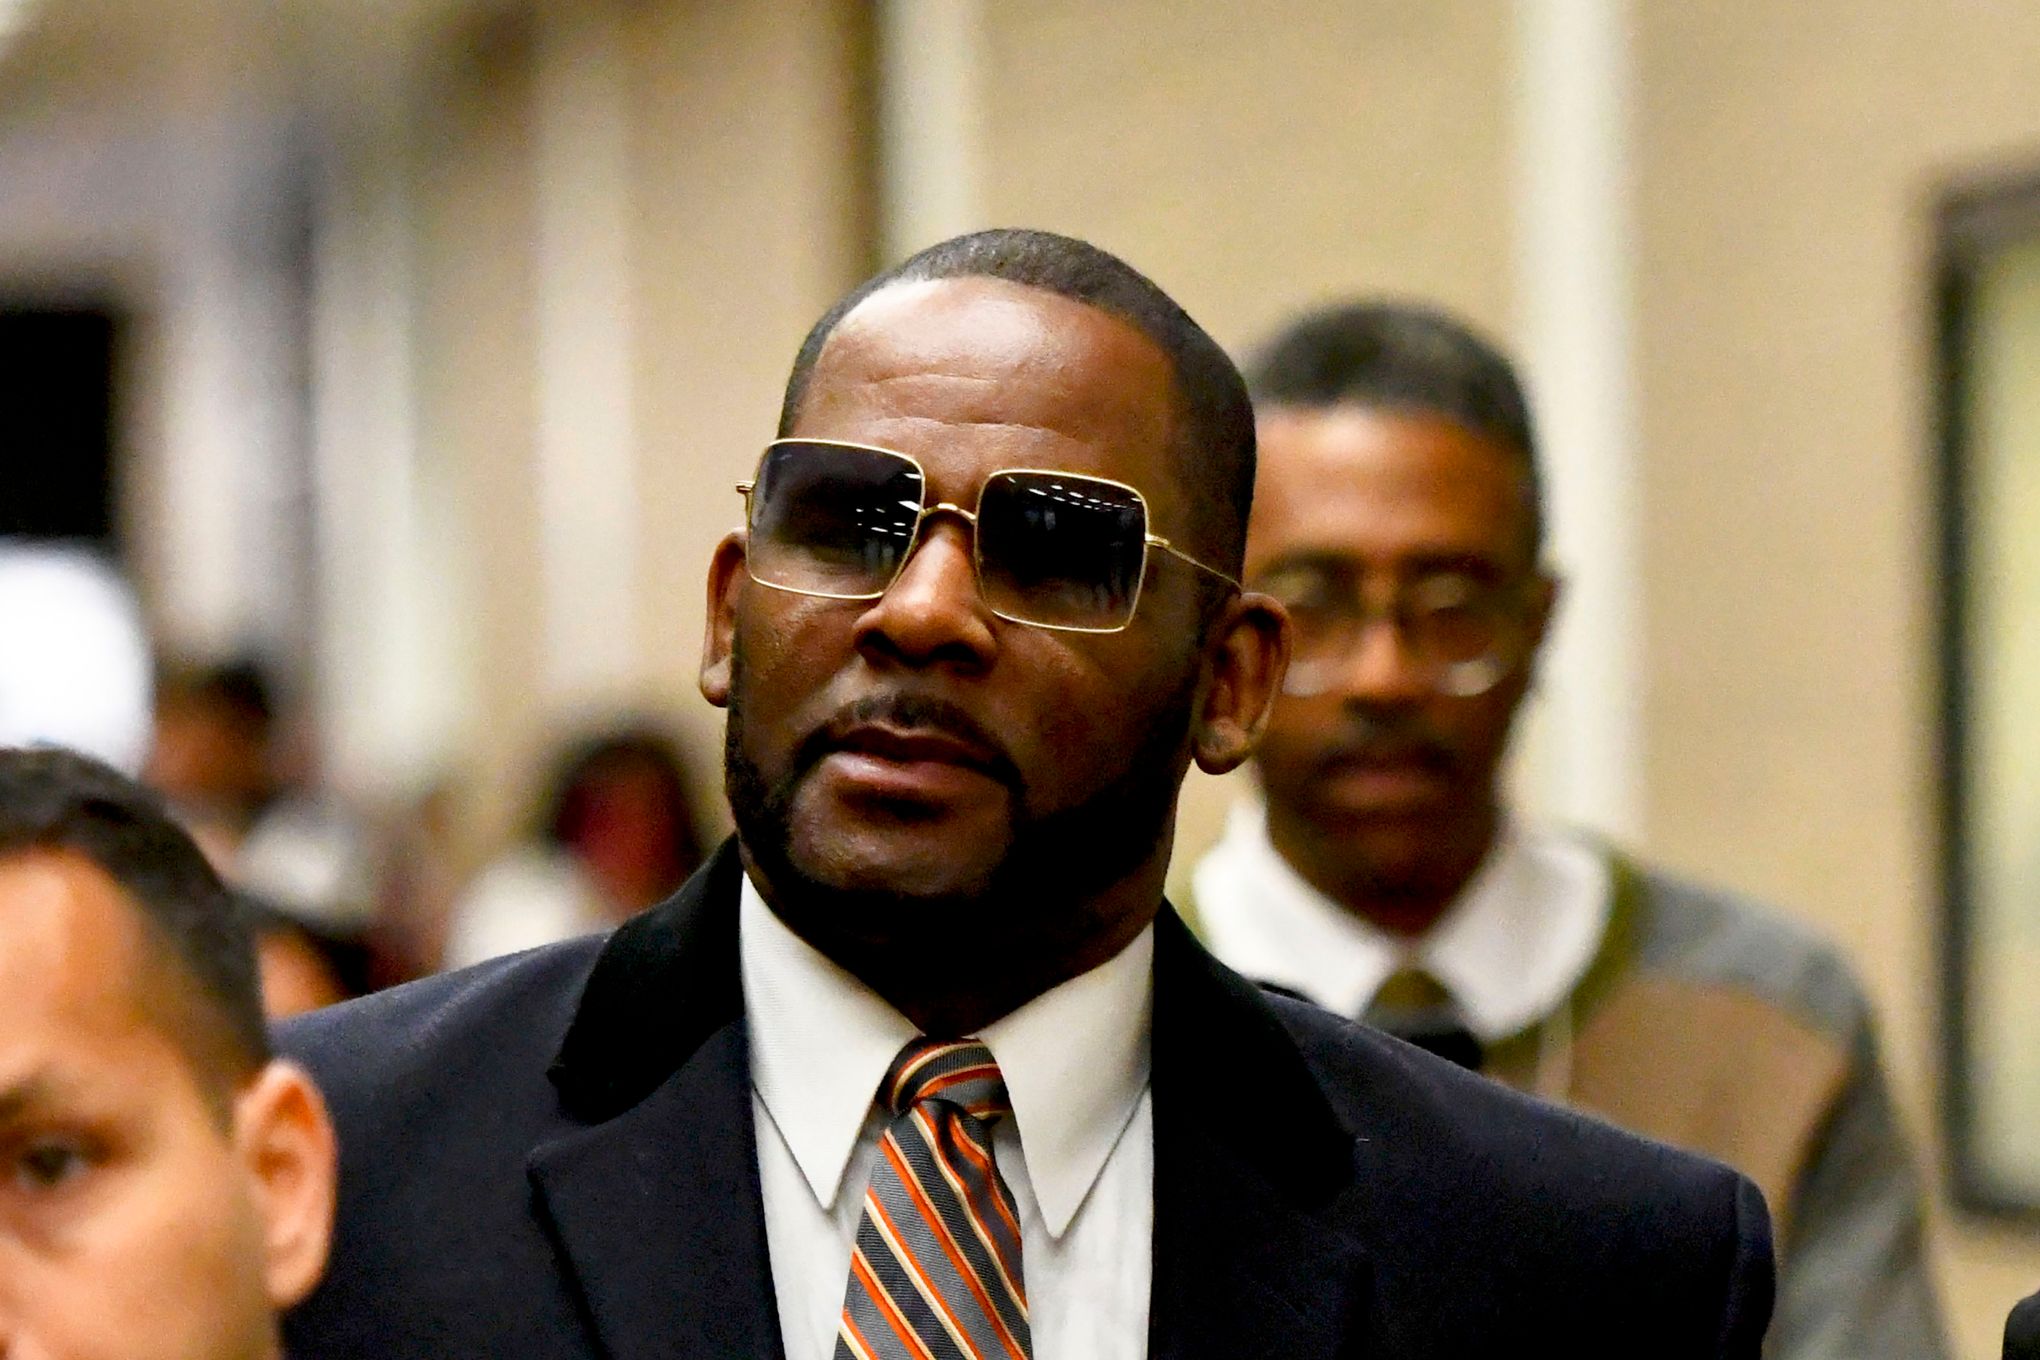 Having Sex In Formal Dress - R. Kelly convicted of child porn, enticing girls for sex | The Seattle Times